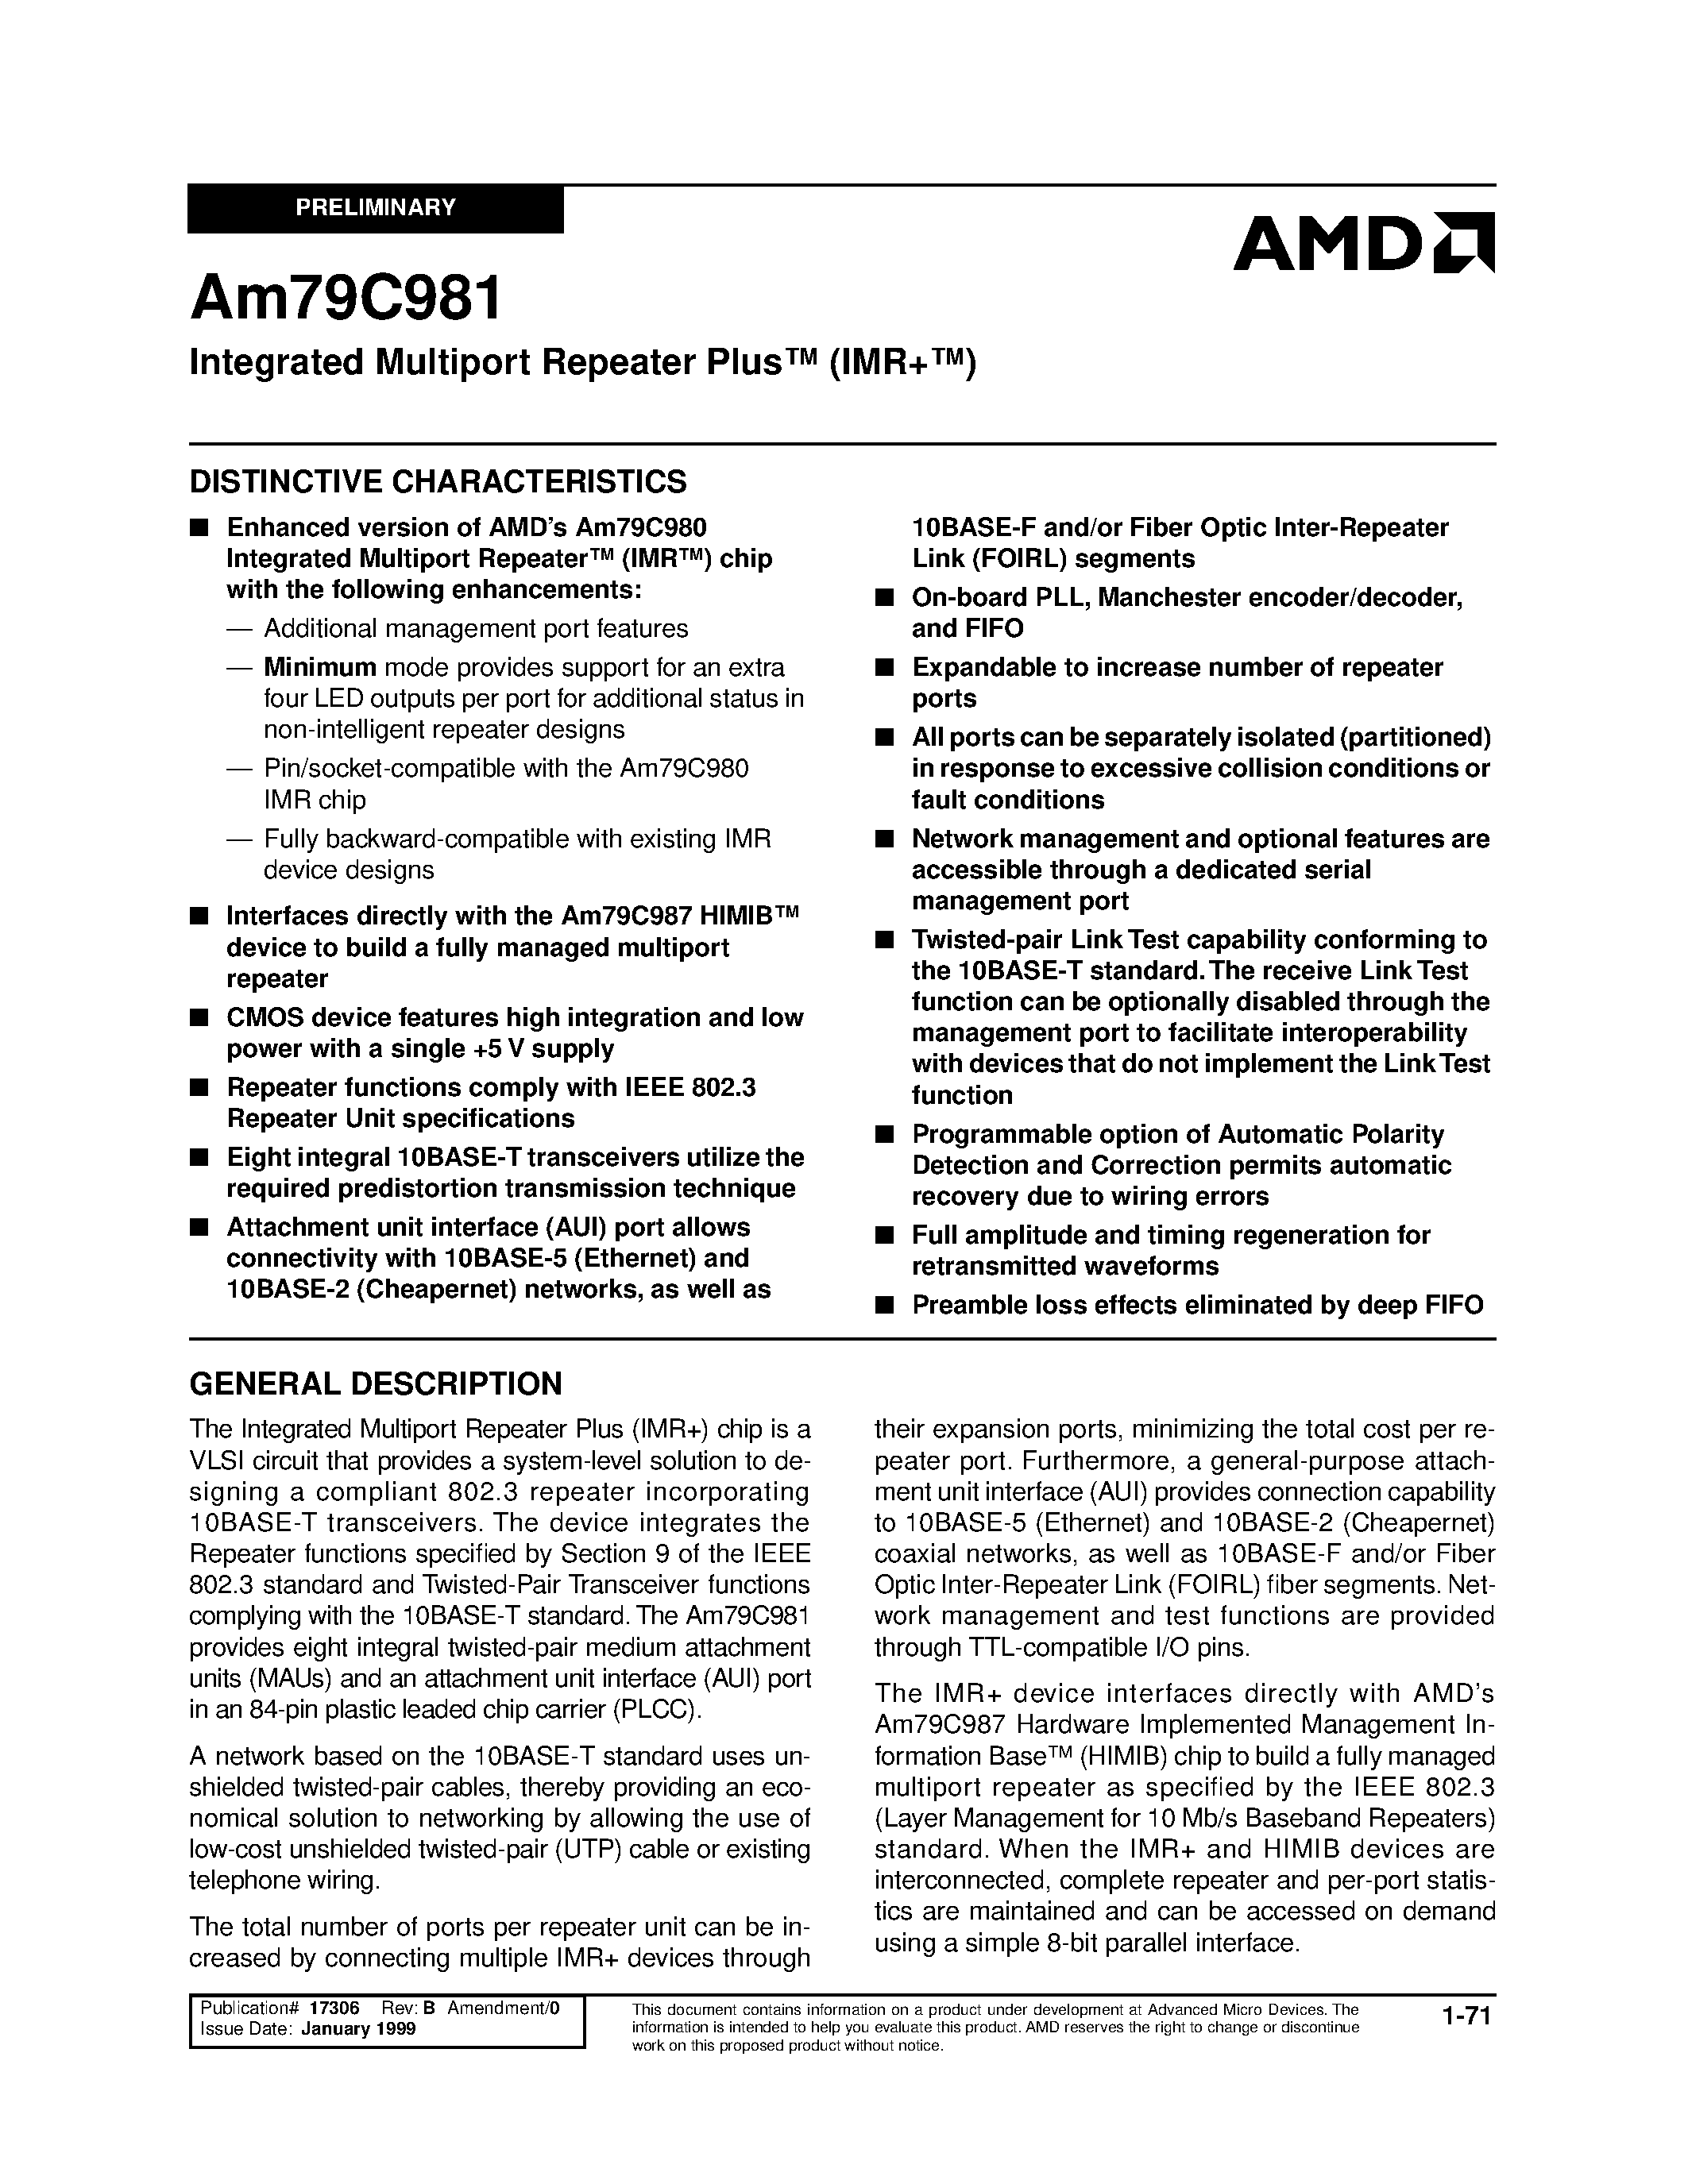 Datasheet Am79C981JC - Integrated Multiport Repeater Plus (IMR+) page 1